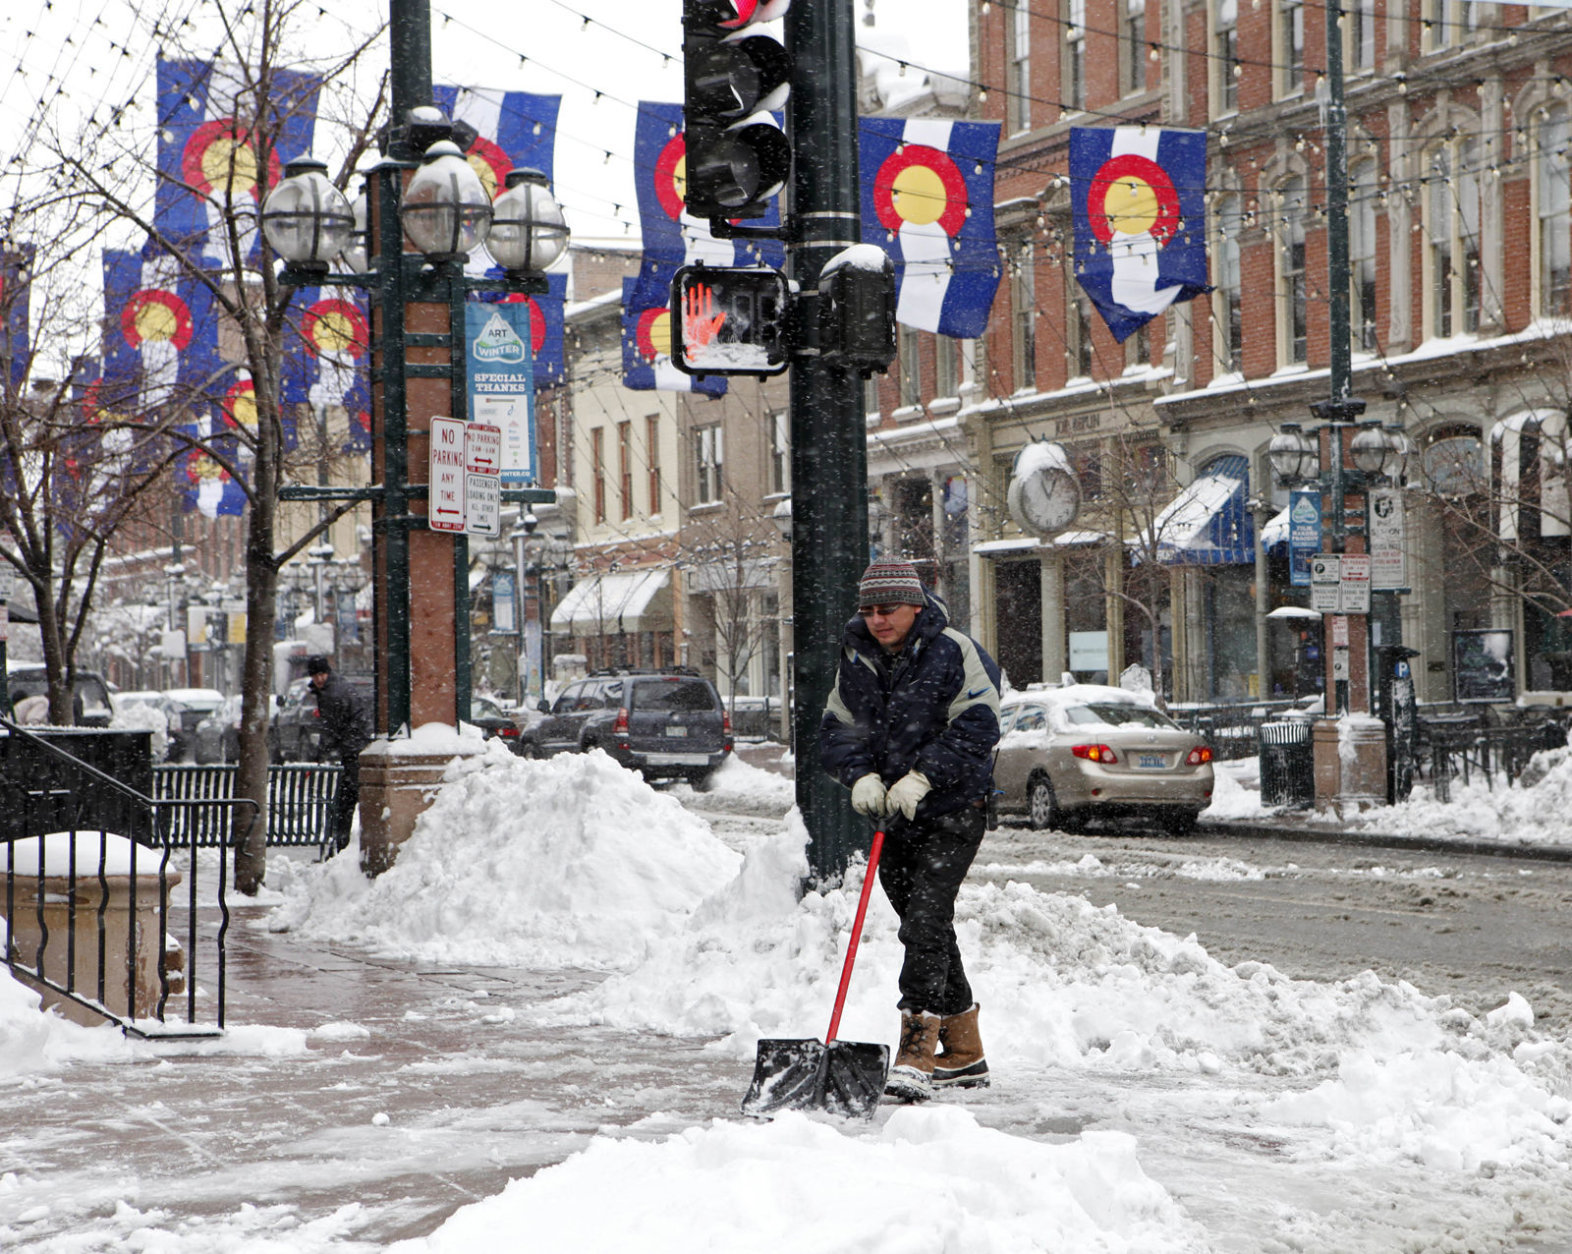 Workers clear the sidewalk on Larimer Square in downtown Denver on Friday, Feb. 3, 2012, after a snow storm hit Denver with 10 inches of snow overnight.   A powerful winter storm swept across Colorado on Friday as it headed east, bringing blizzard warnings to eastern Colorado and western Kansas, and winter storm warnings for southeast Wyoming and western Nebraska.  (AP Photo/Ed Andrieski)